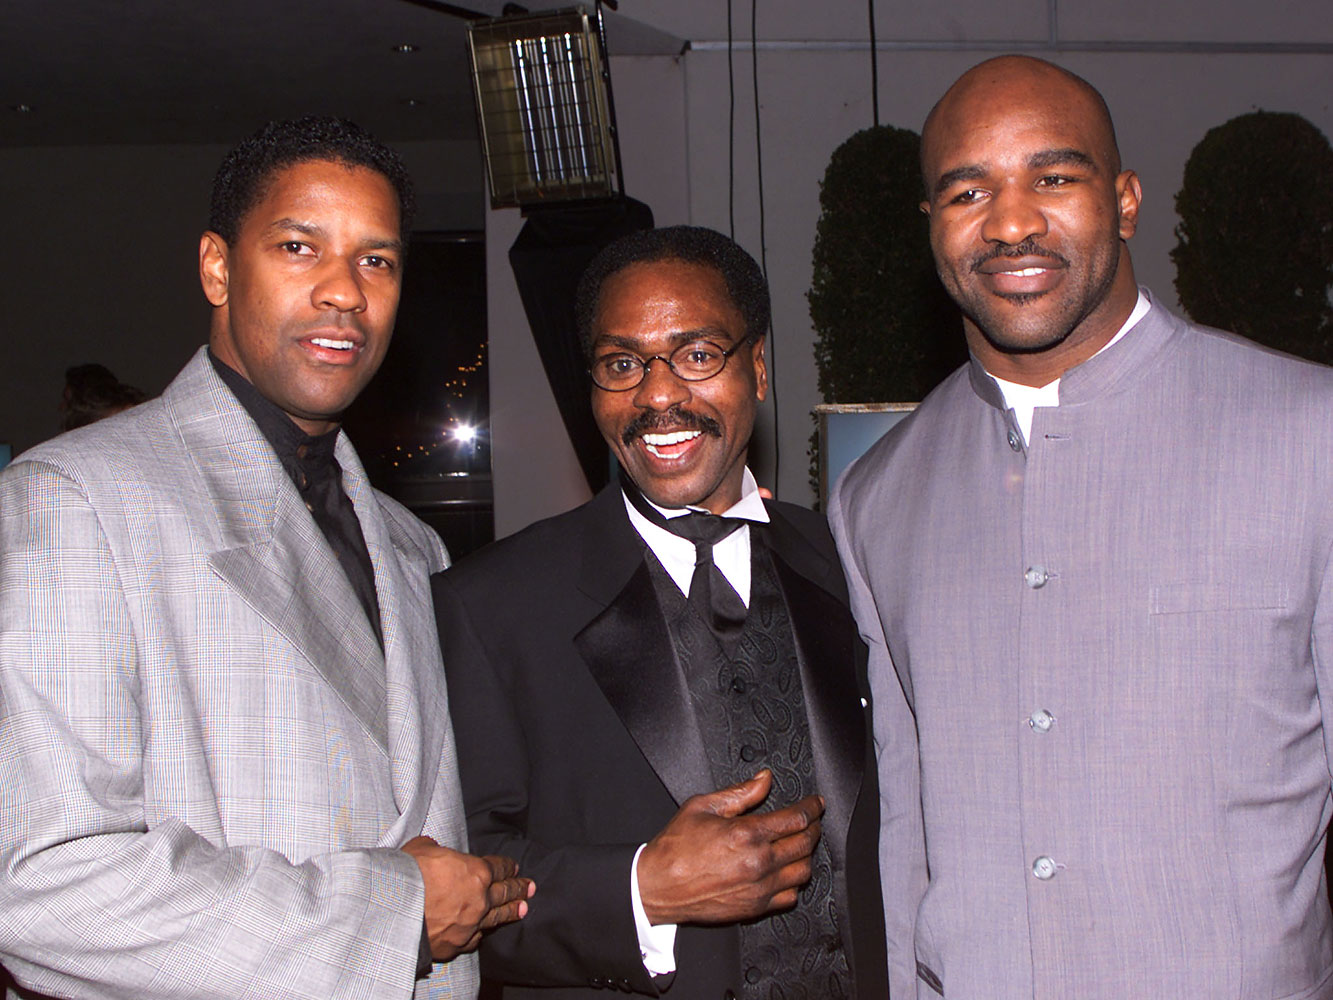 From left, Denzel Wahington, Rubin Carter, and Evander Holyfield  at the premier of The Hurricane, a film starring Denzel Washington on the life of Rubin Carter, Dec. 14 1999 in Los Angeles.